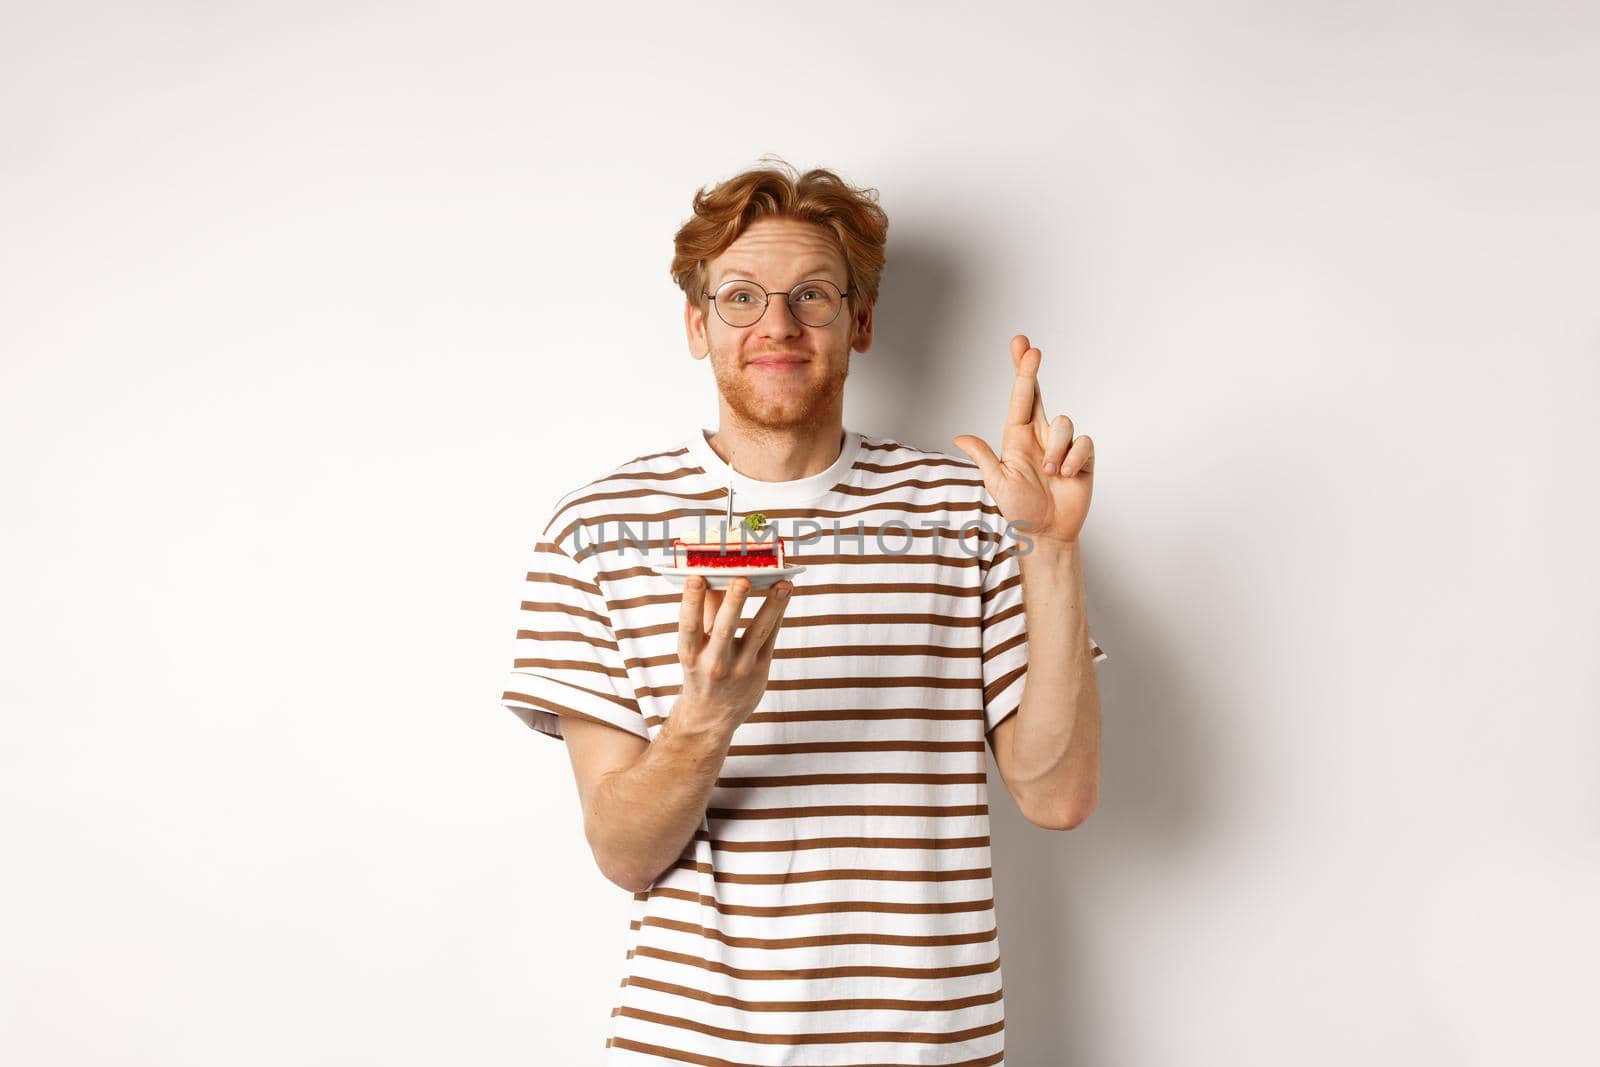 Holidays and celebration concept. Cheerful redhead man in glasses holding birthday cake with candle, cross fingers for good luck and making wish, white background.